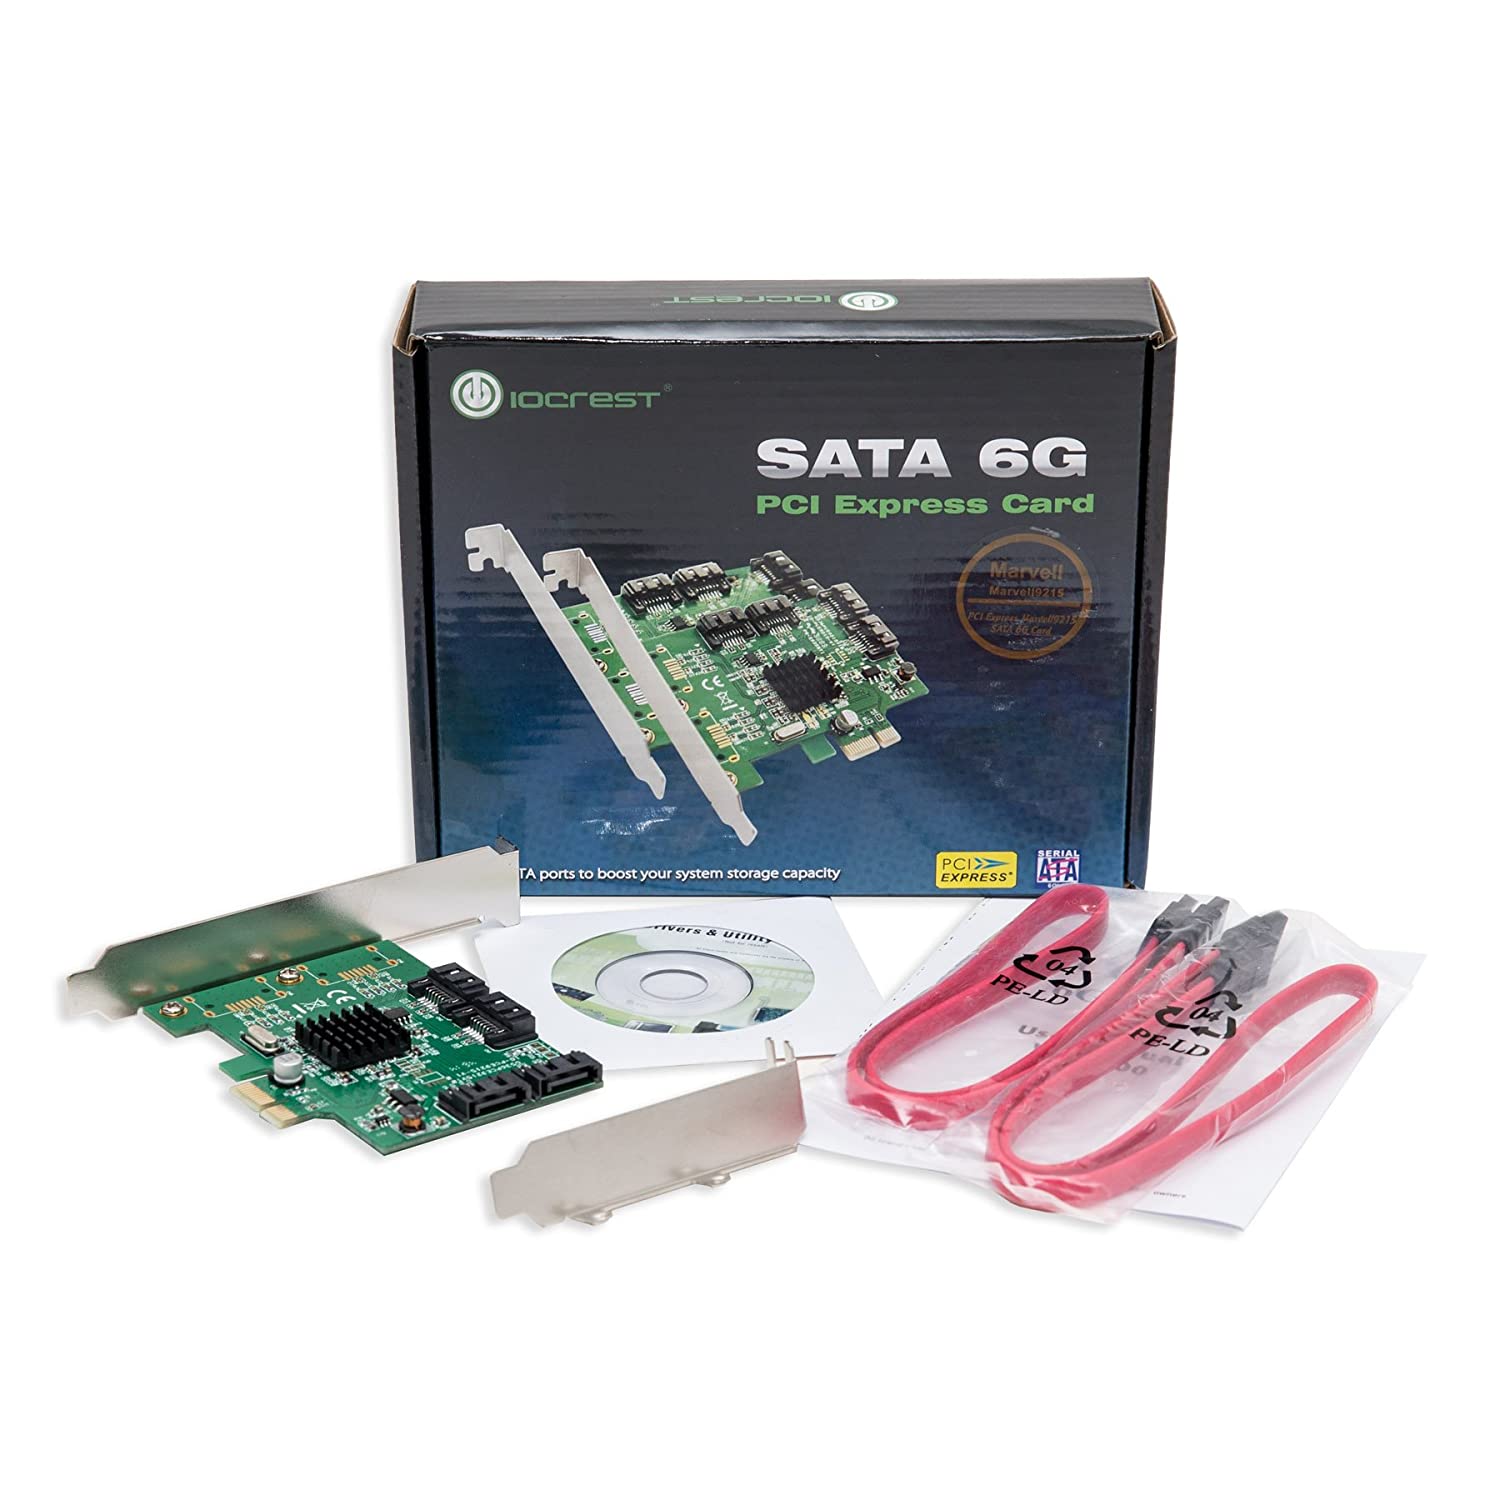 Marvell sata iii driver for mac